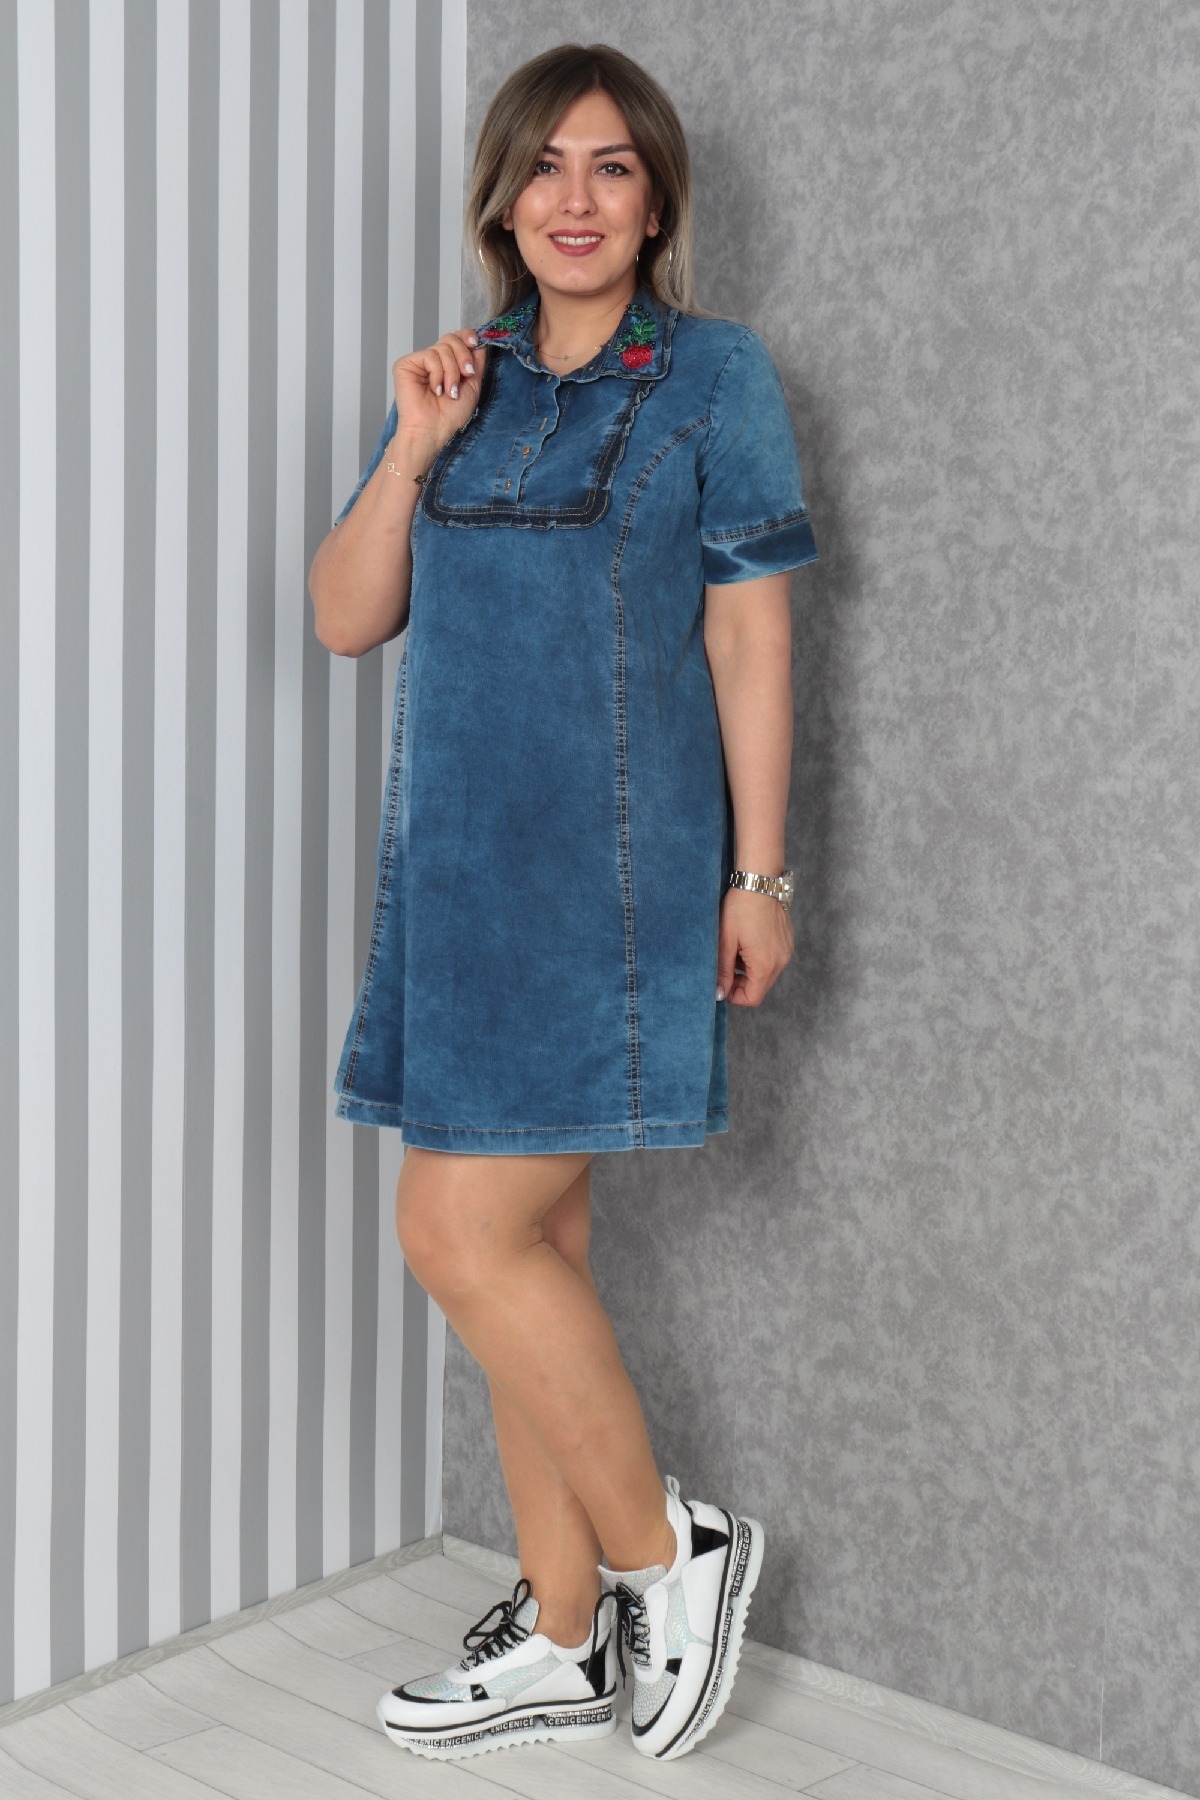 Plus Size Denim Dress - Get Cheap Price Right Here